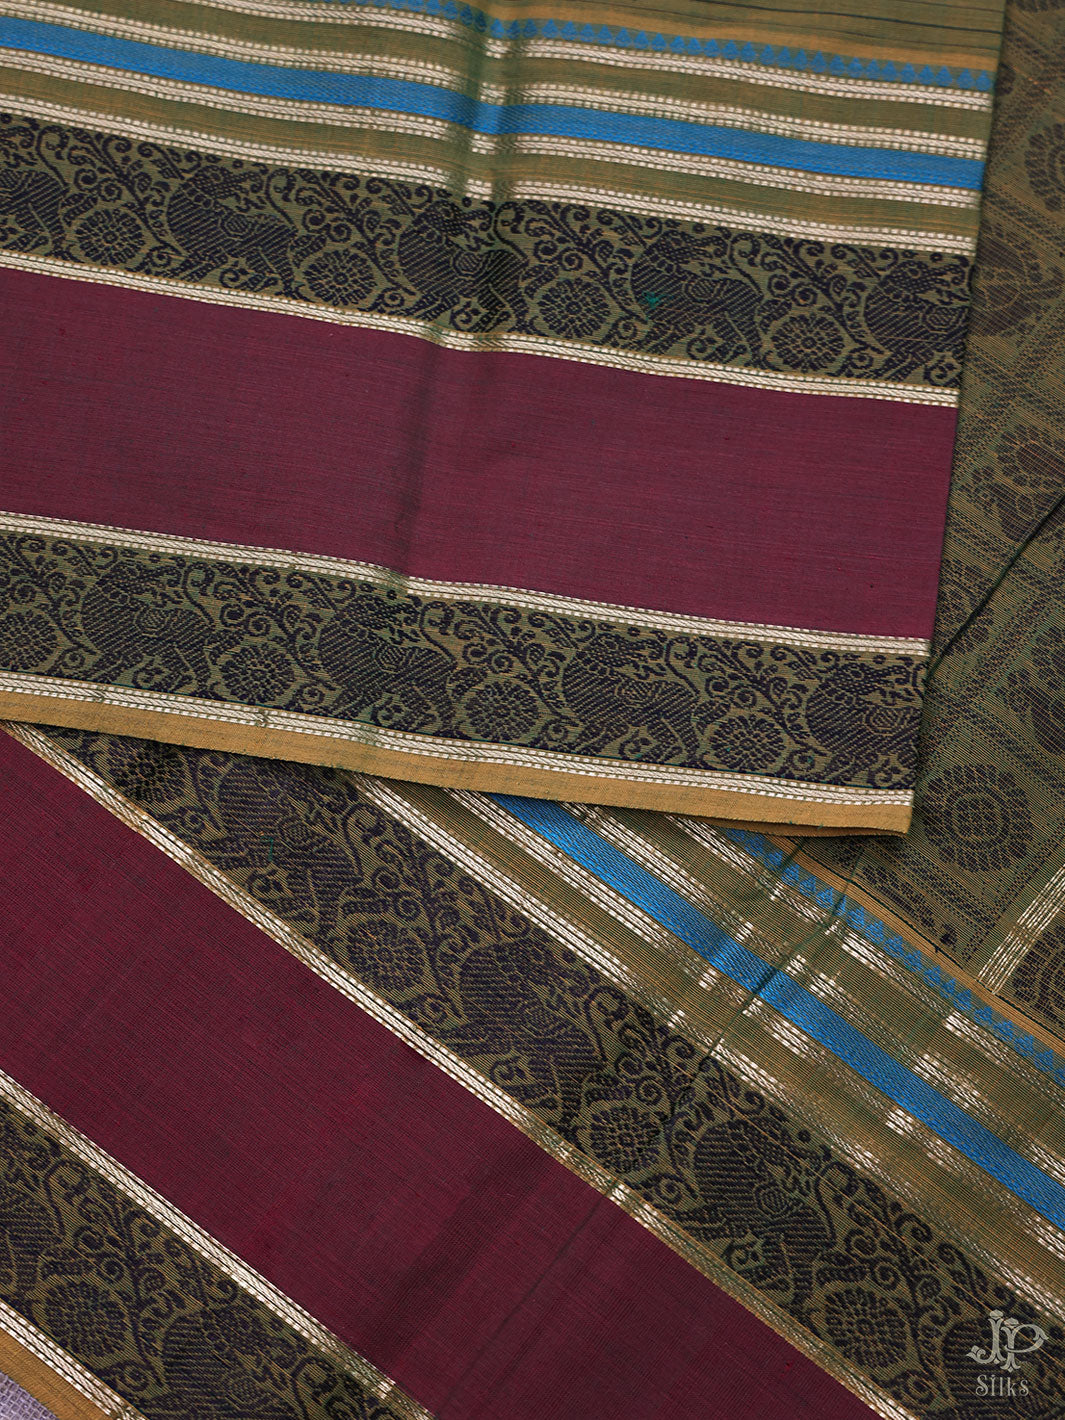 Olive Green and Maroon Pure Kanchi Cotton Saree - D9750 - View 5